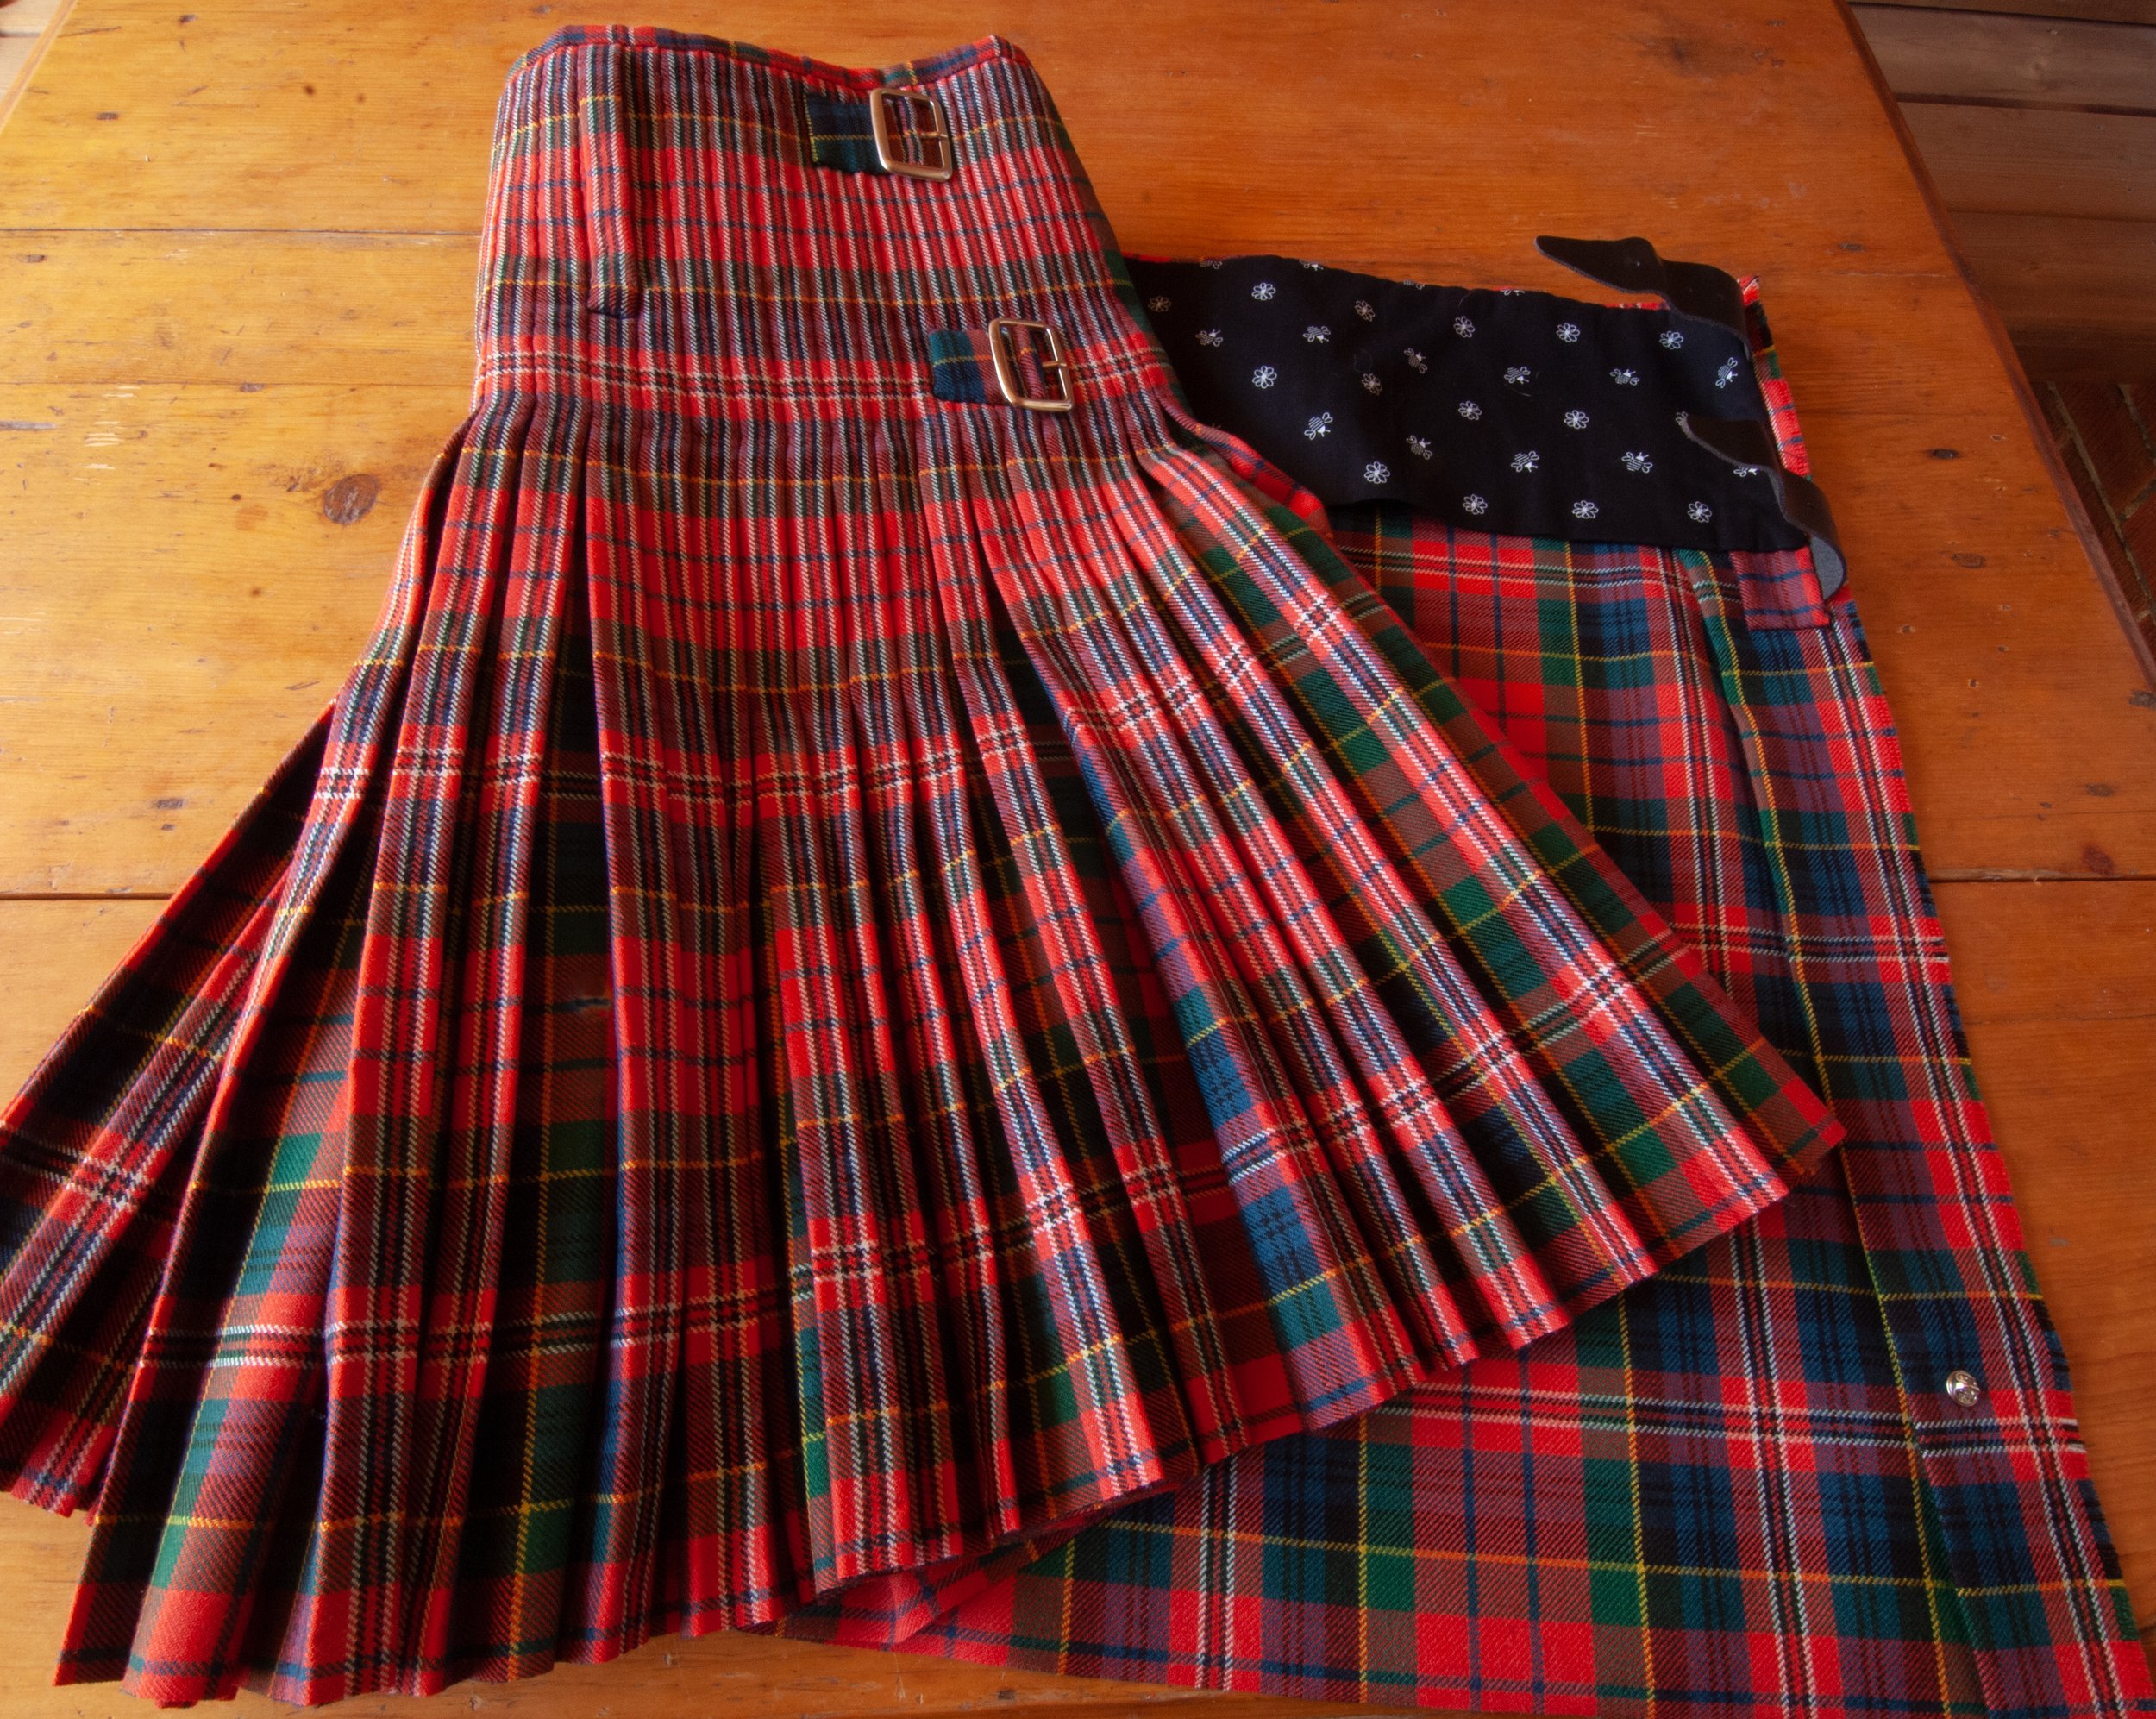   MacPherson Military Box Pleated Kilt , 2019. Wool, Cotton, leather and metal buckles. COURTESY OF ROBIN CASSADY-CAIN 